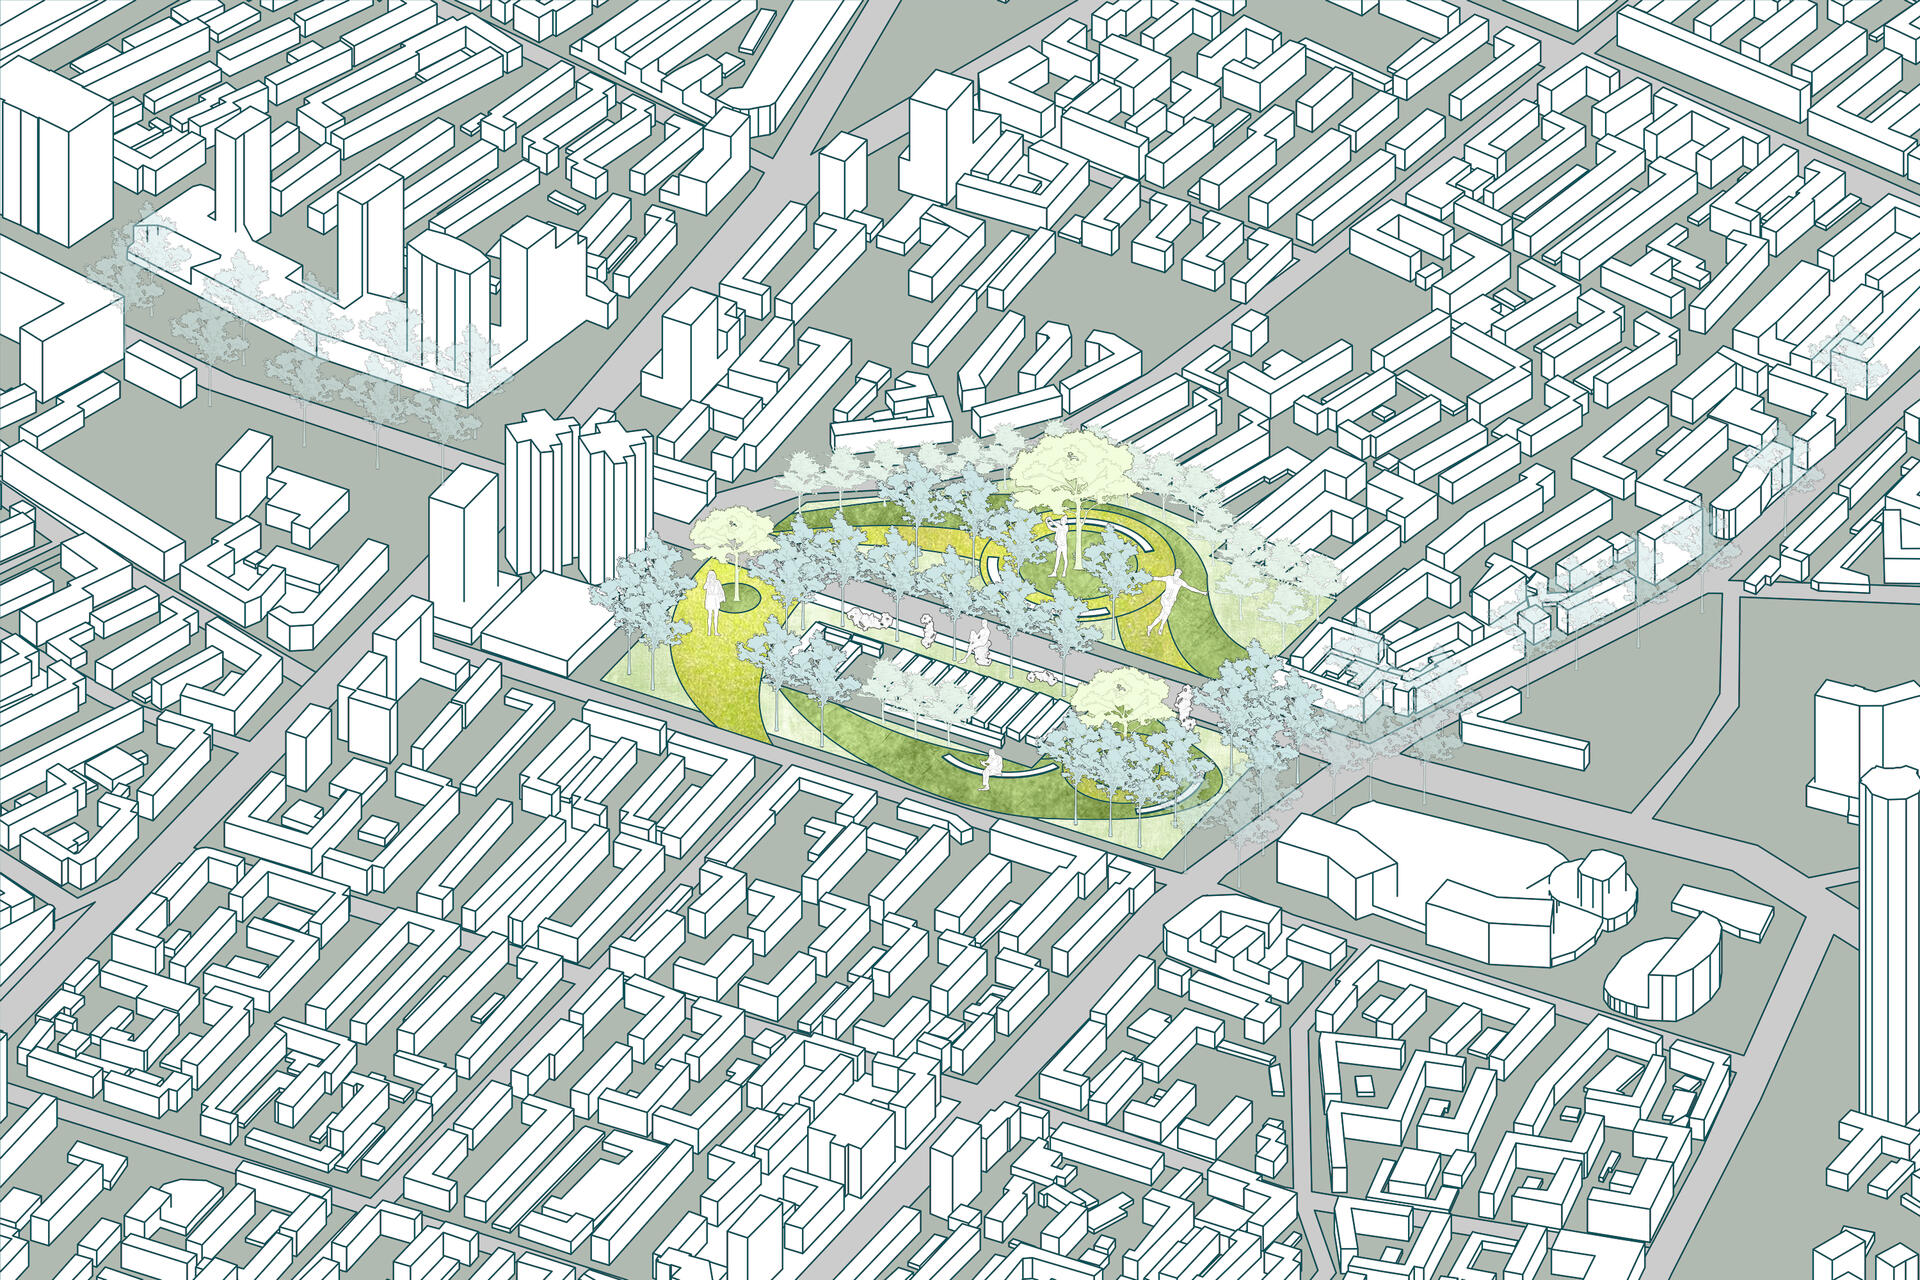 The new park design to direct pedestrian flow toward a system of green ecosystem